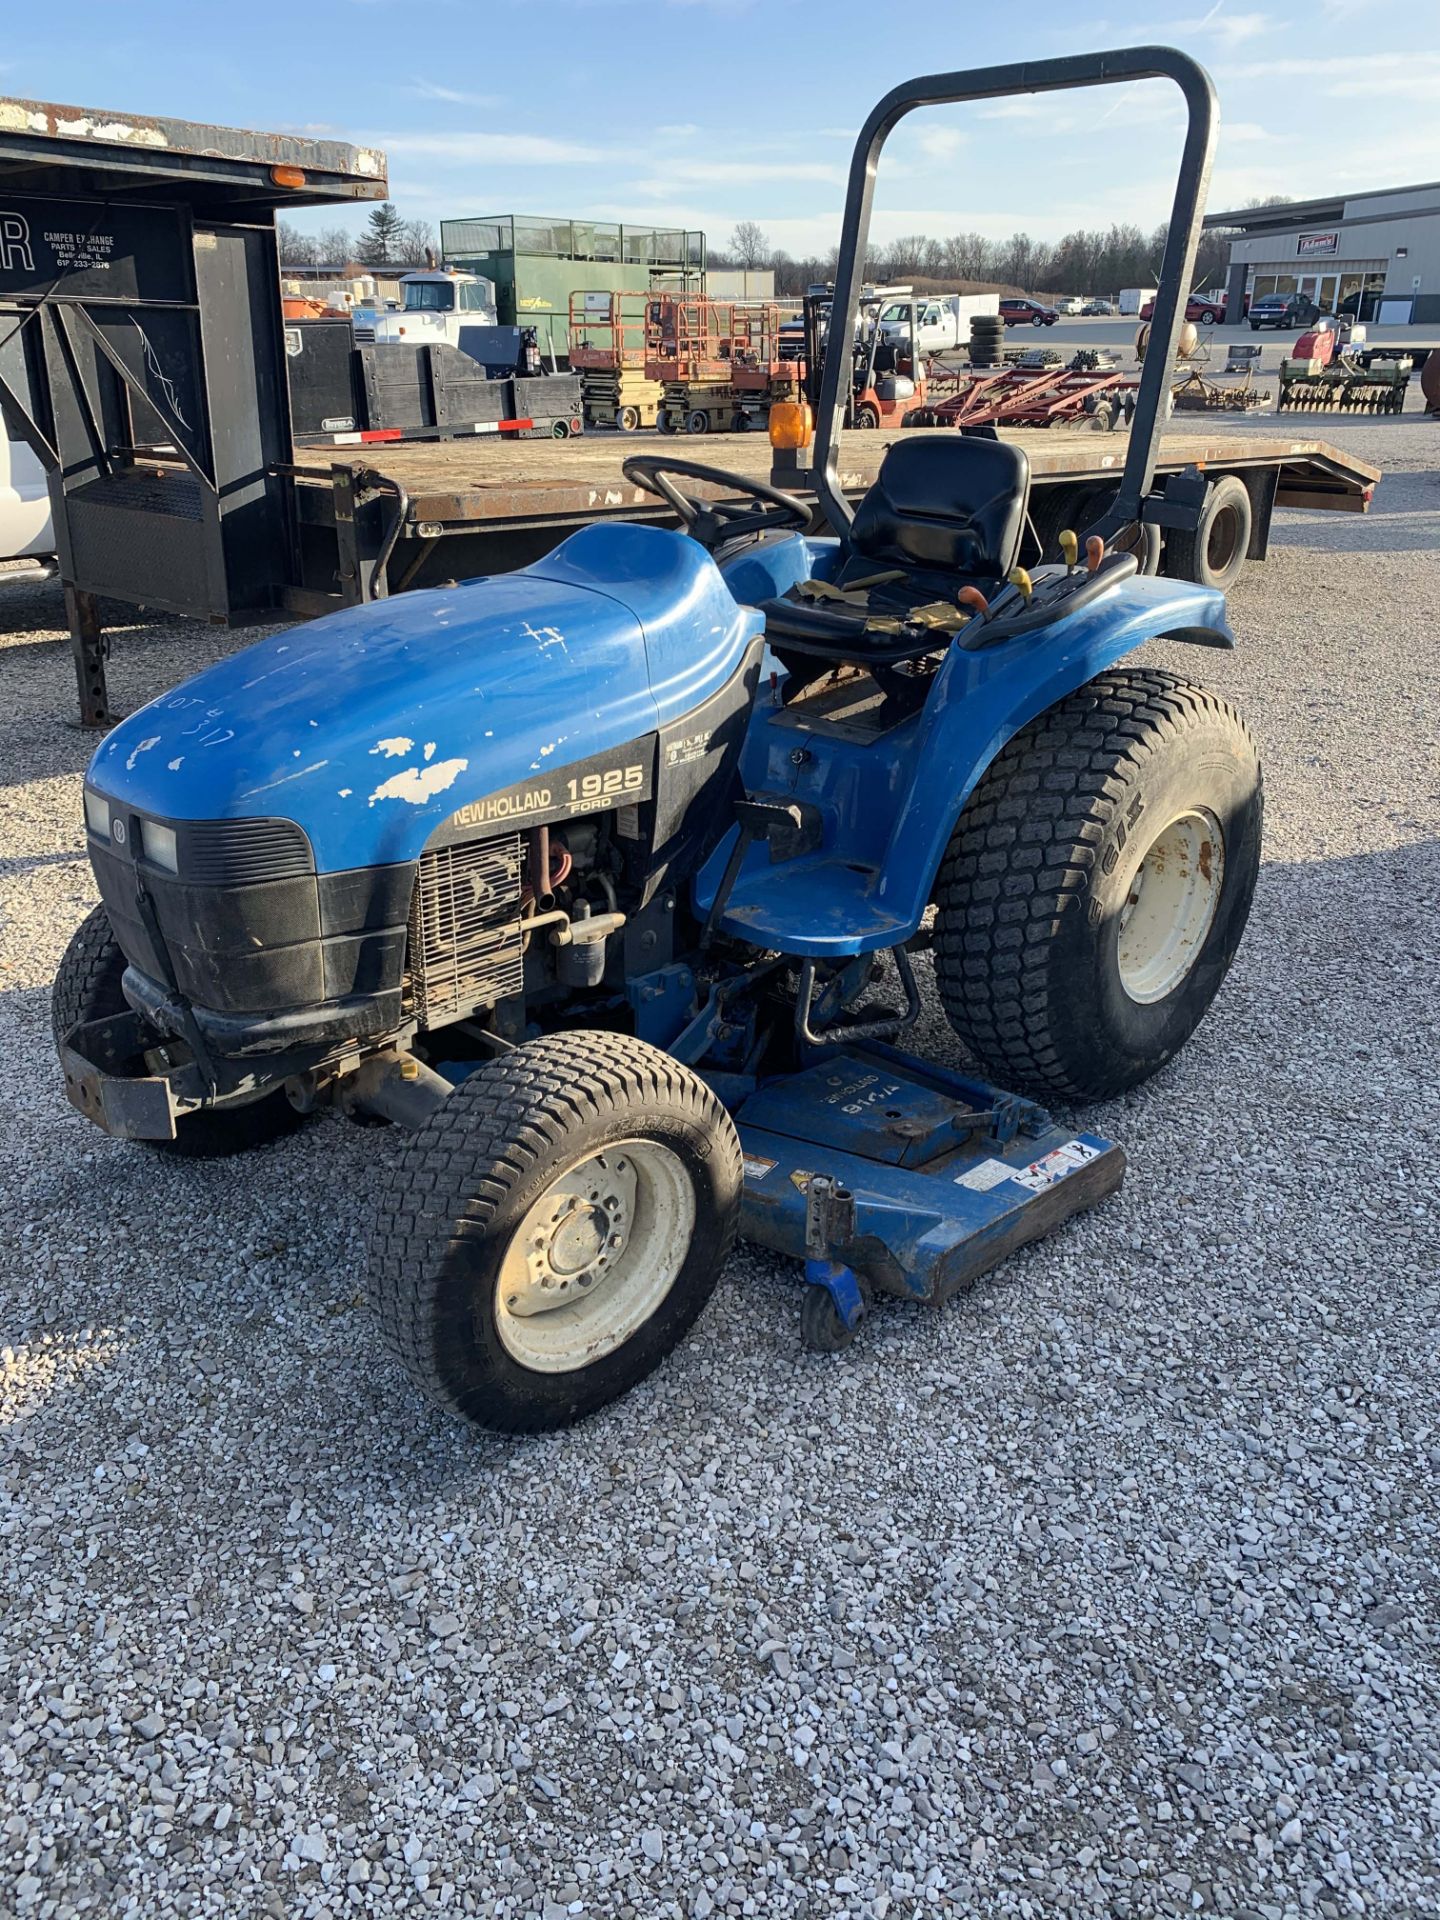 1998 NEW HOLLAND 1925 TRACTOR, 4WD, 2380HRS, SER#G006032 with 1998 NEW HOLLAND 914A 6' MOWER DECK, - Image 3 of 5